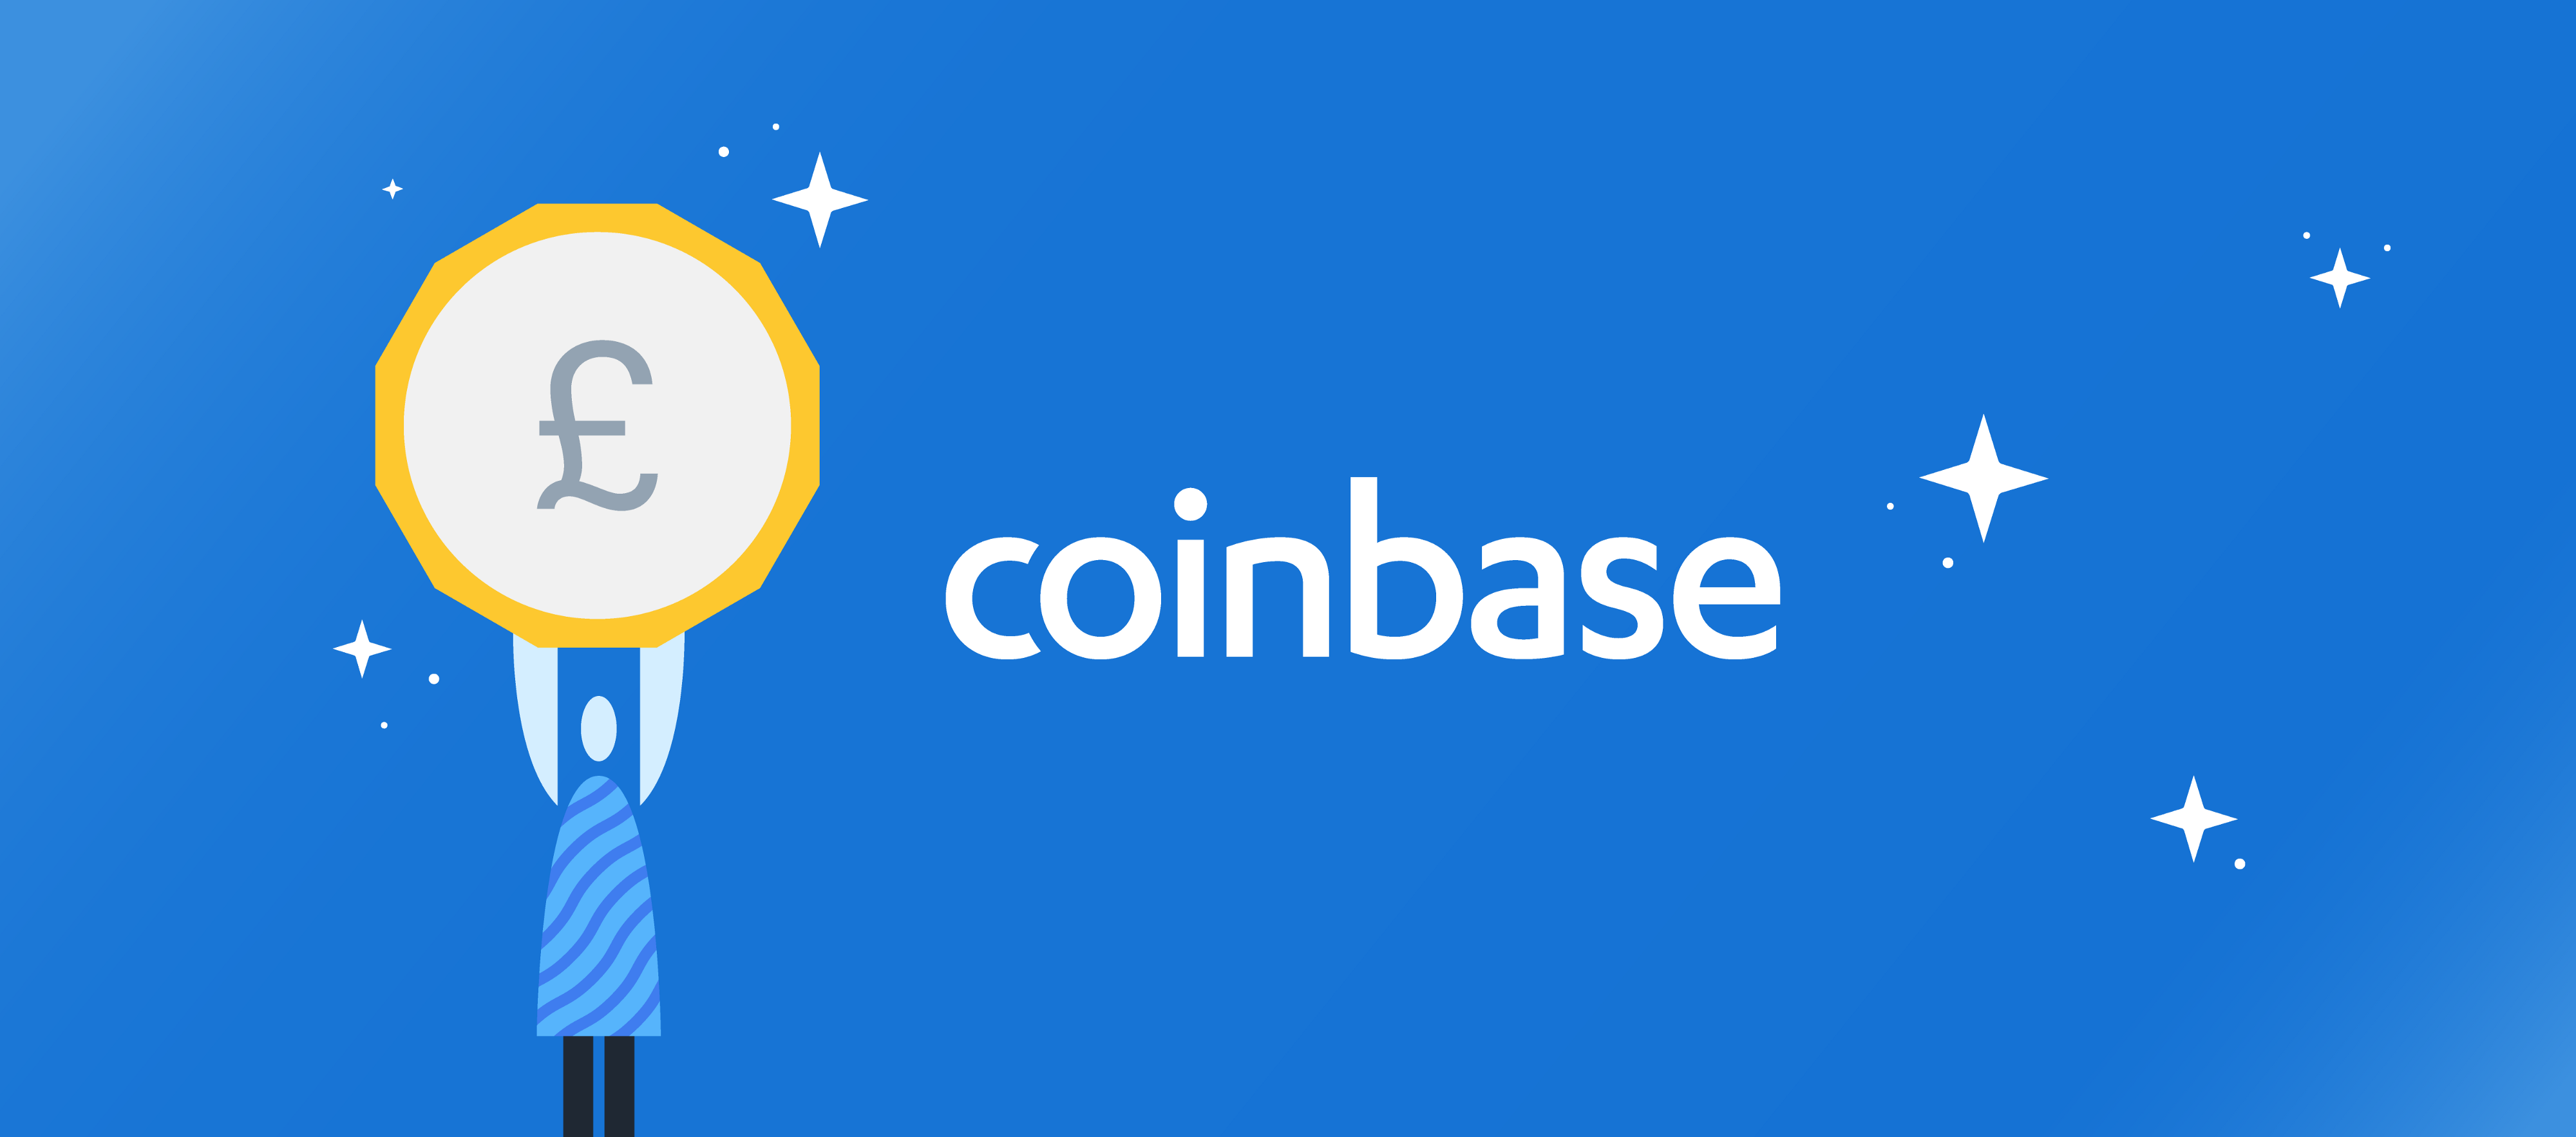 Coinbase UK wants to be excluded from a cryptocurrency theft case